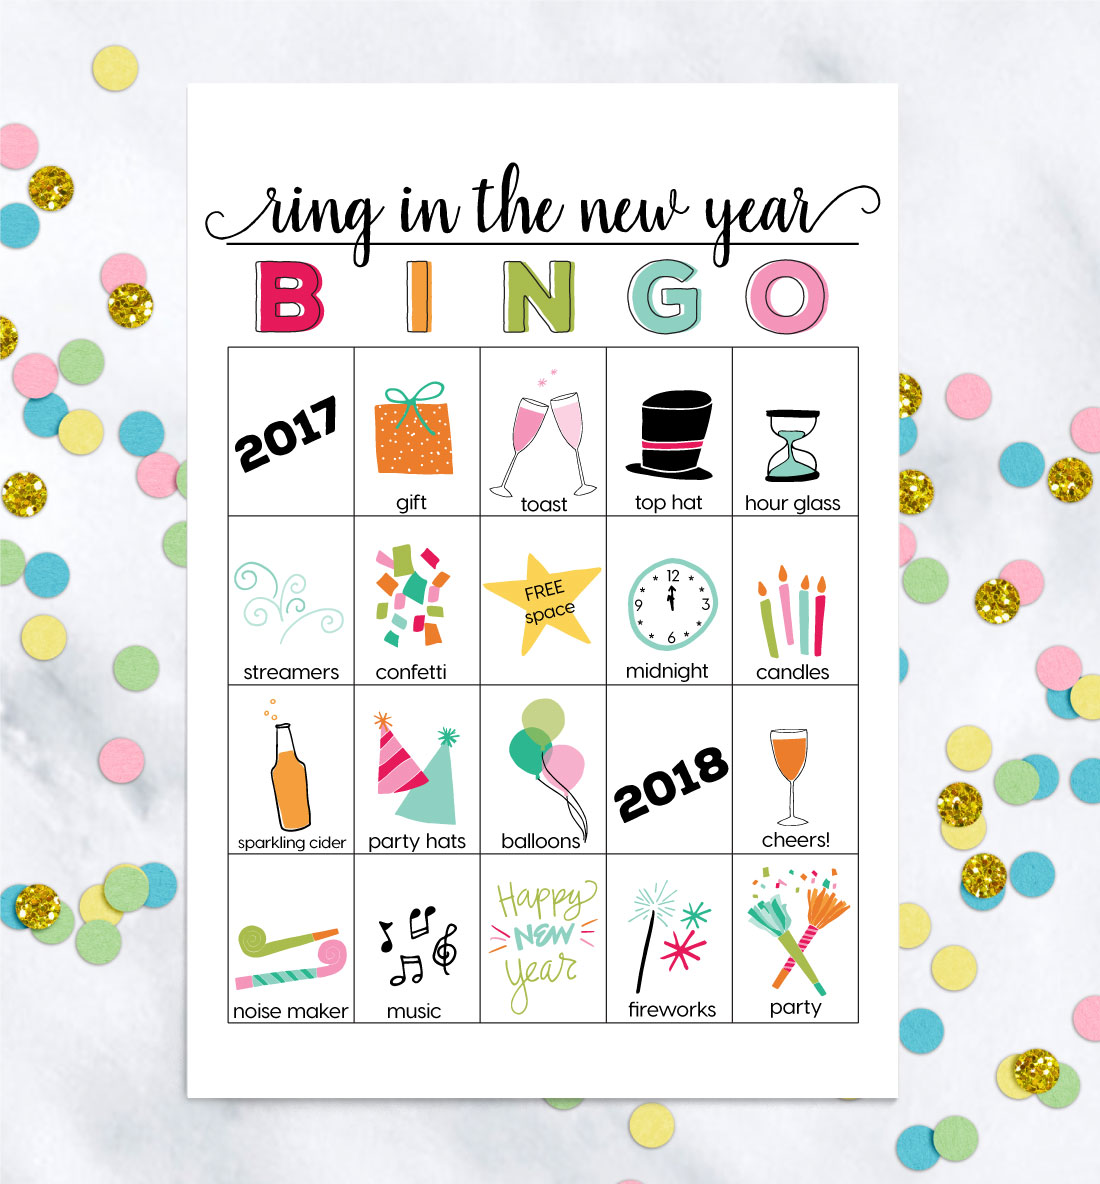 free-printable-new-year-s-eve-word-scramble-pjs-and-paint